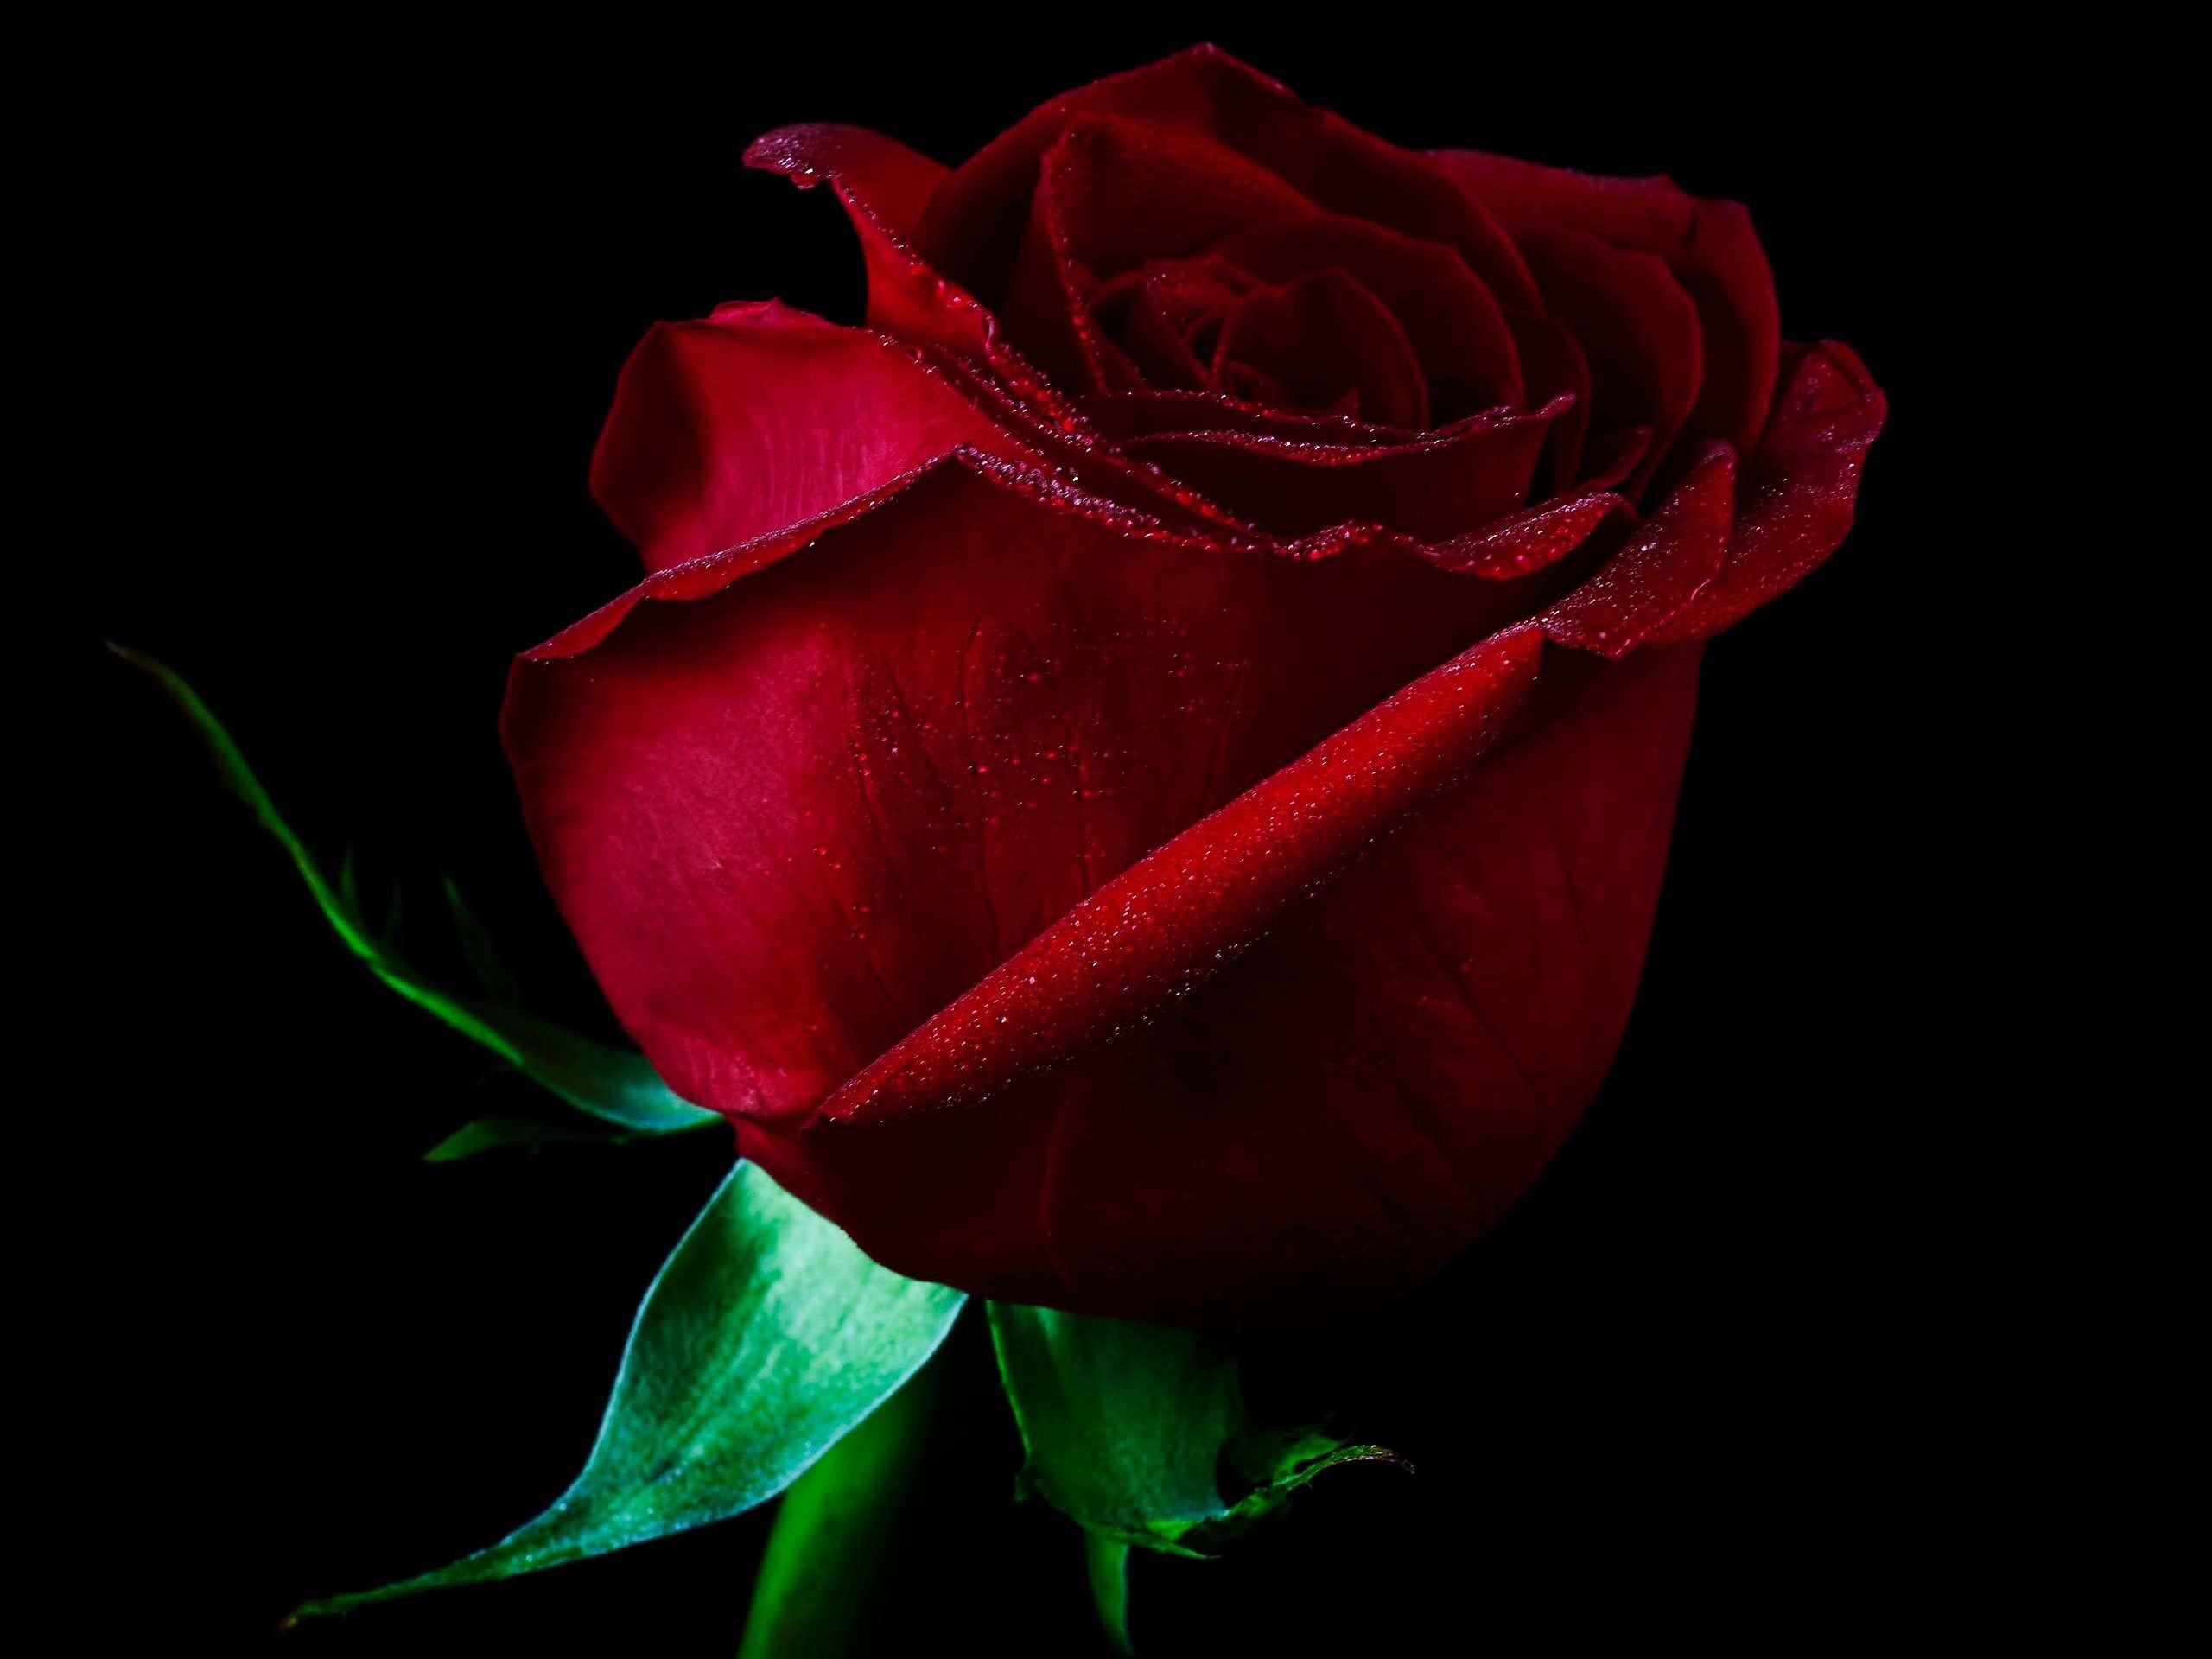 Black and Red Rose Wallpaper (63+ images)